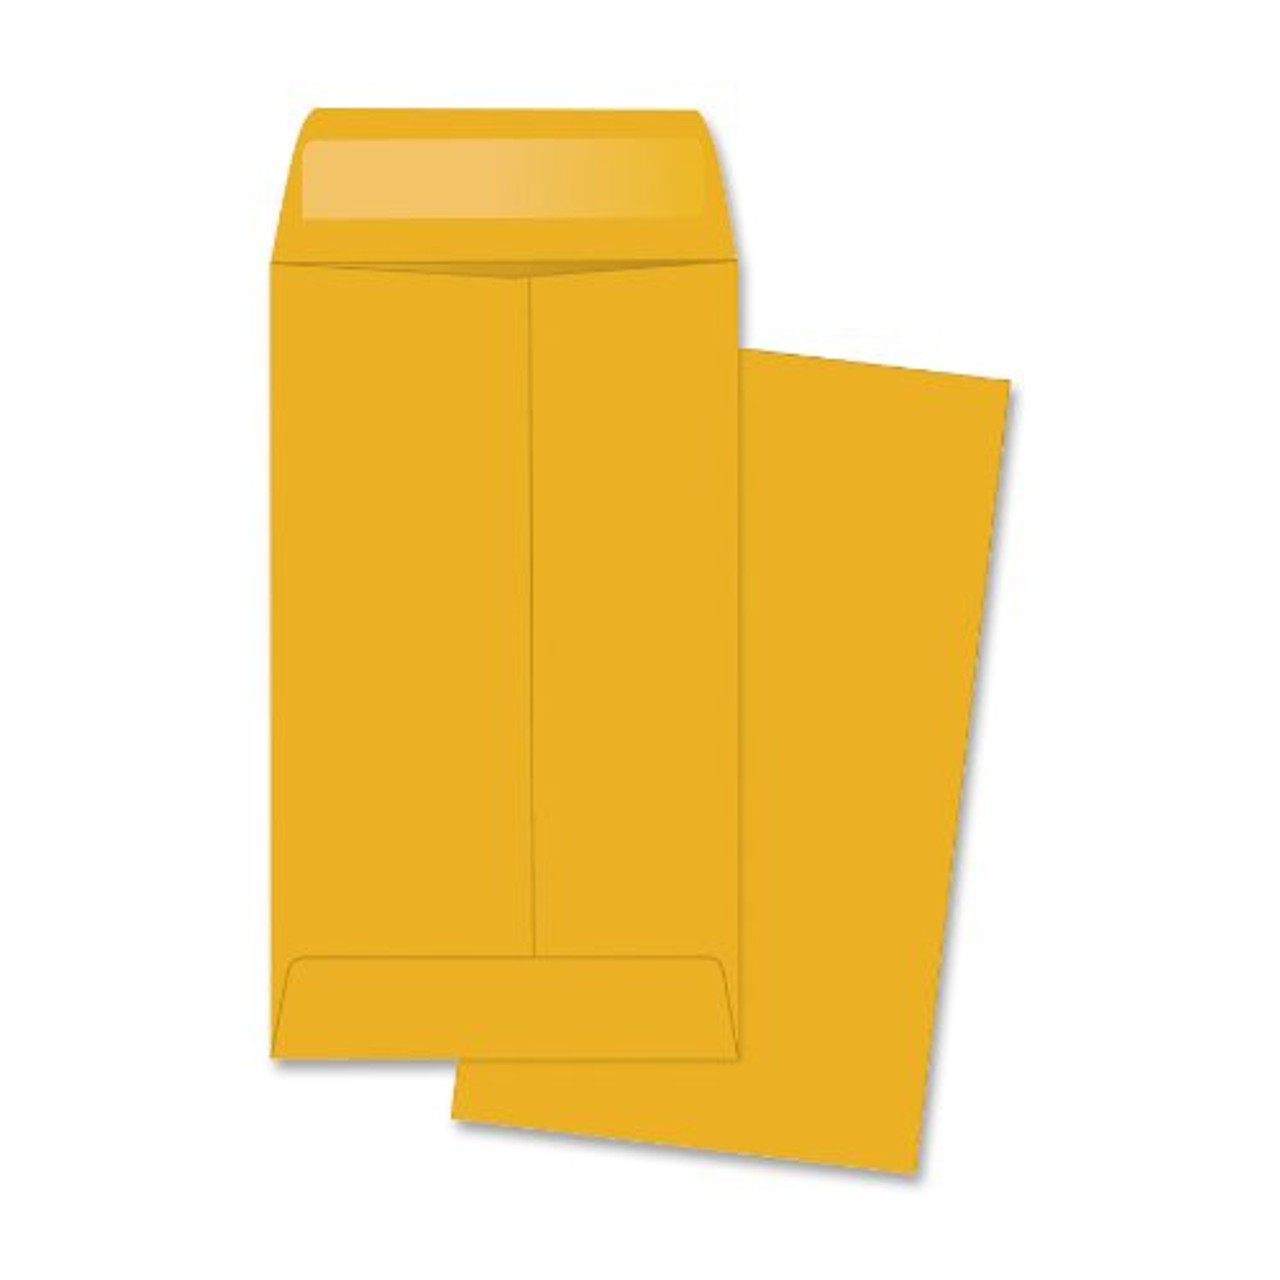 Quality Park - Kraft Coin & Small Parts Envelope